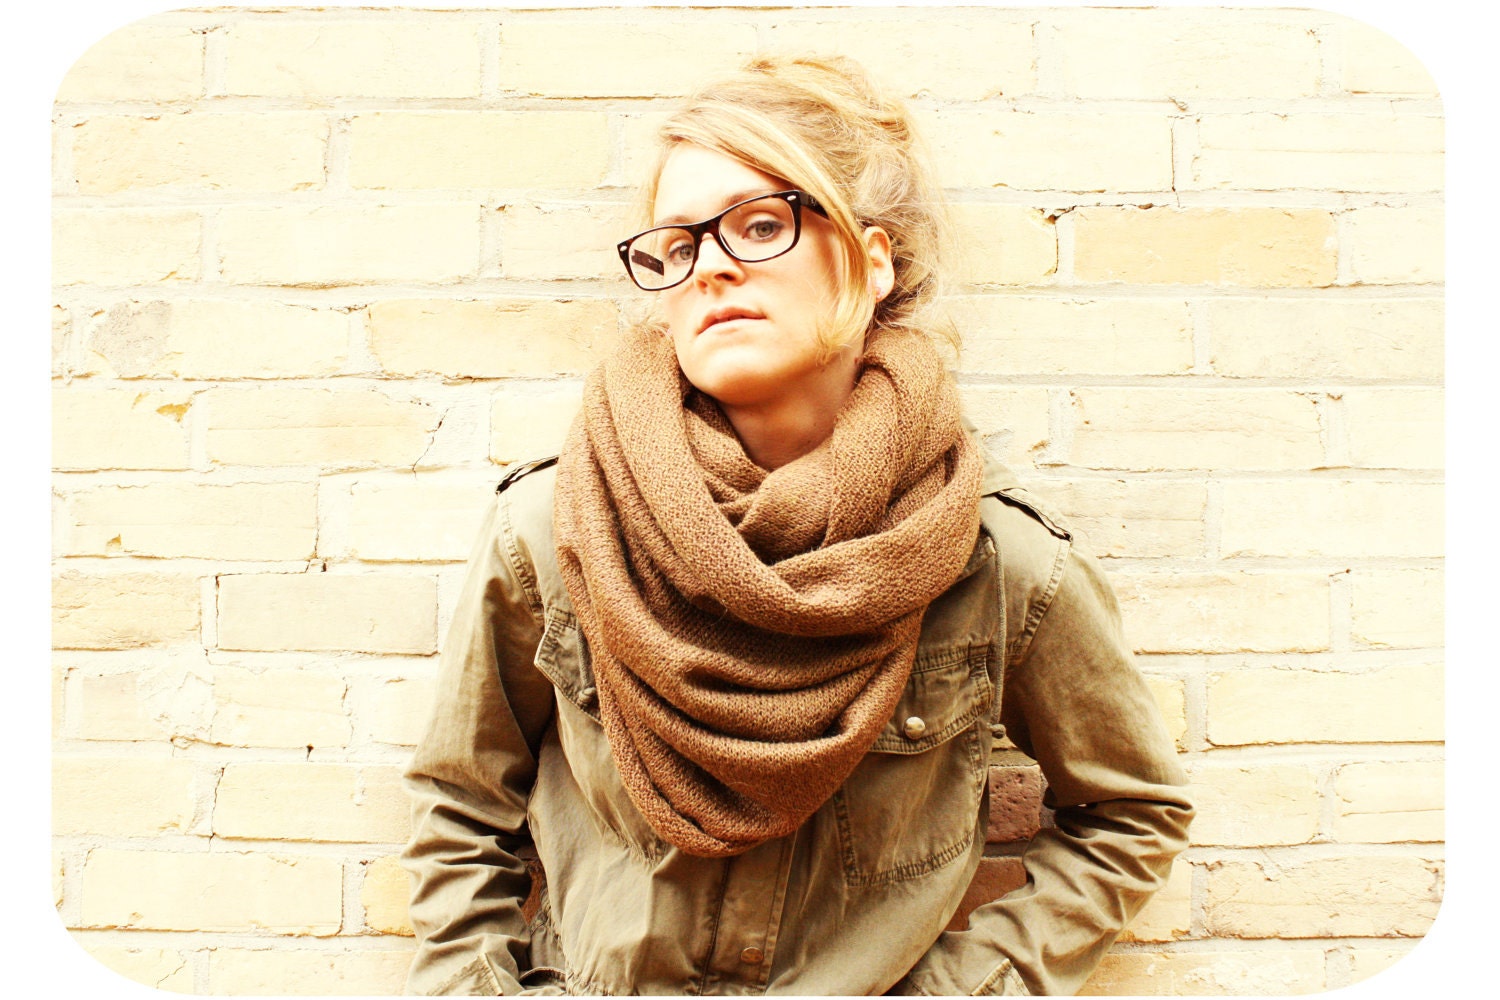 Chunky Infinity Scarf - CARAMEL Sweater Knit. Circle Scarf, Eternity Scarf, Loop Scarf, Winter Scarf, Tube Scarf, Fall Scarf, Hipster